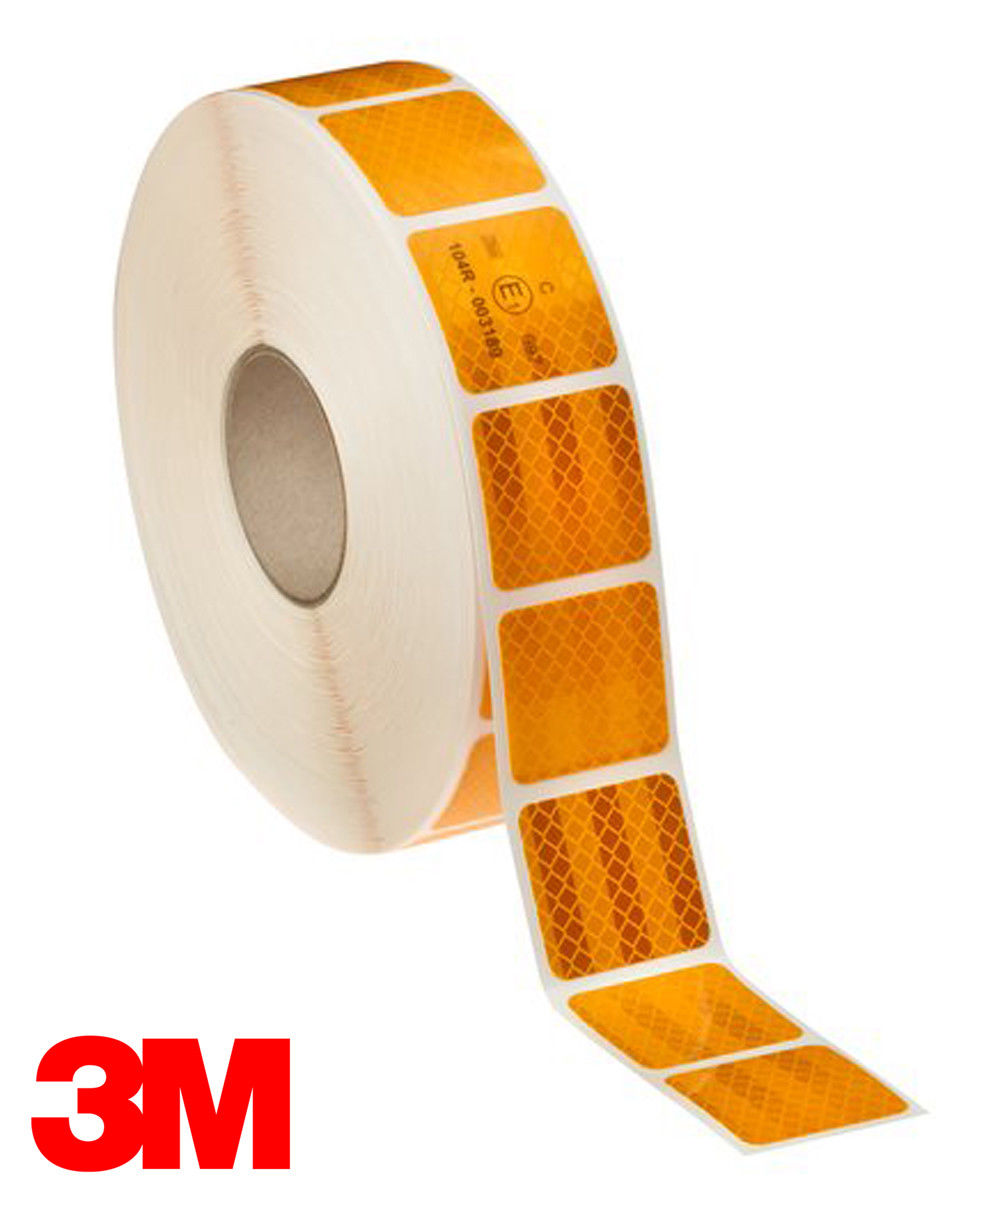 3M 987s Yellow Conspicuity Tape - Segmented